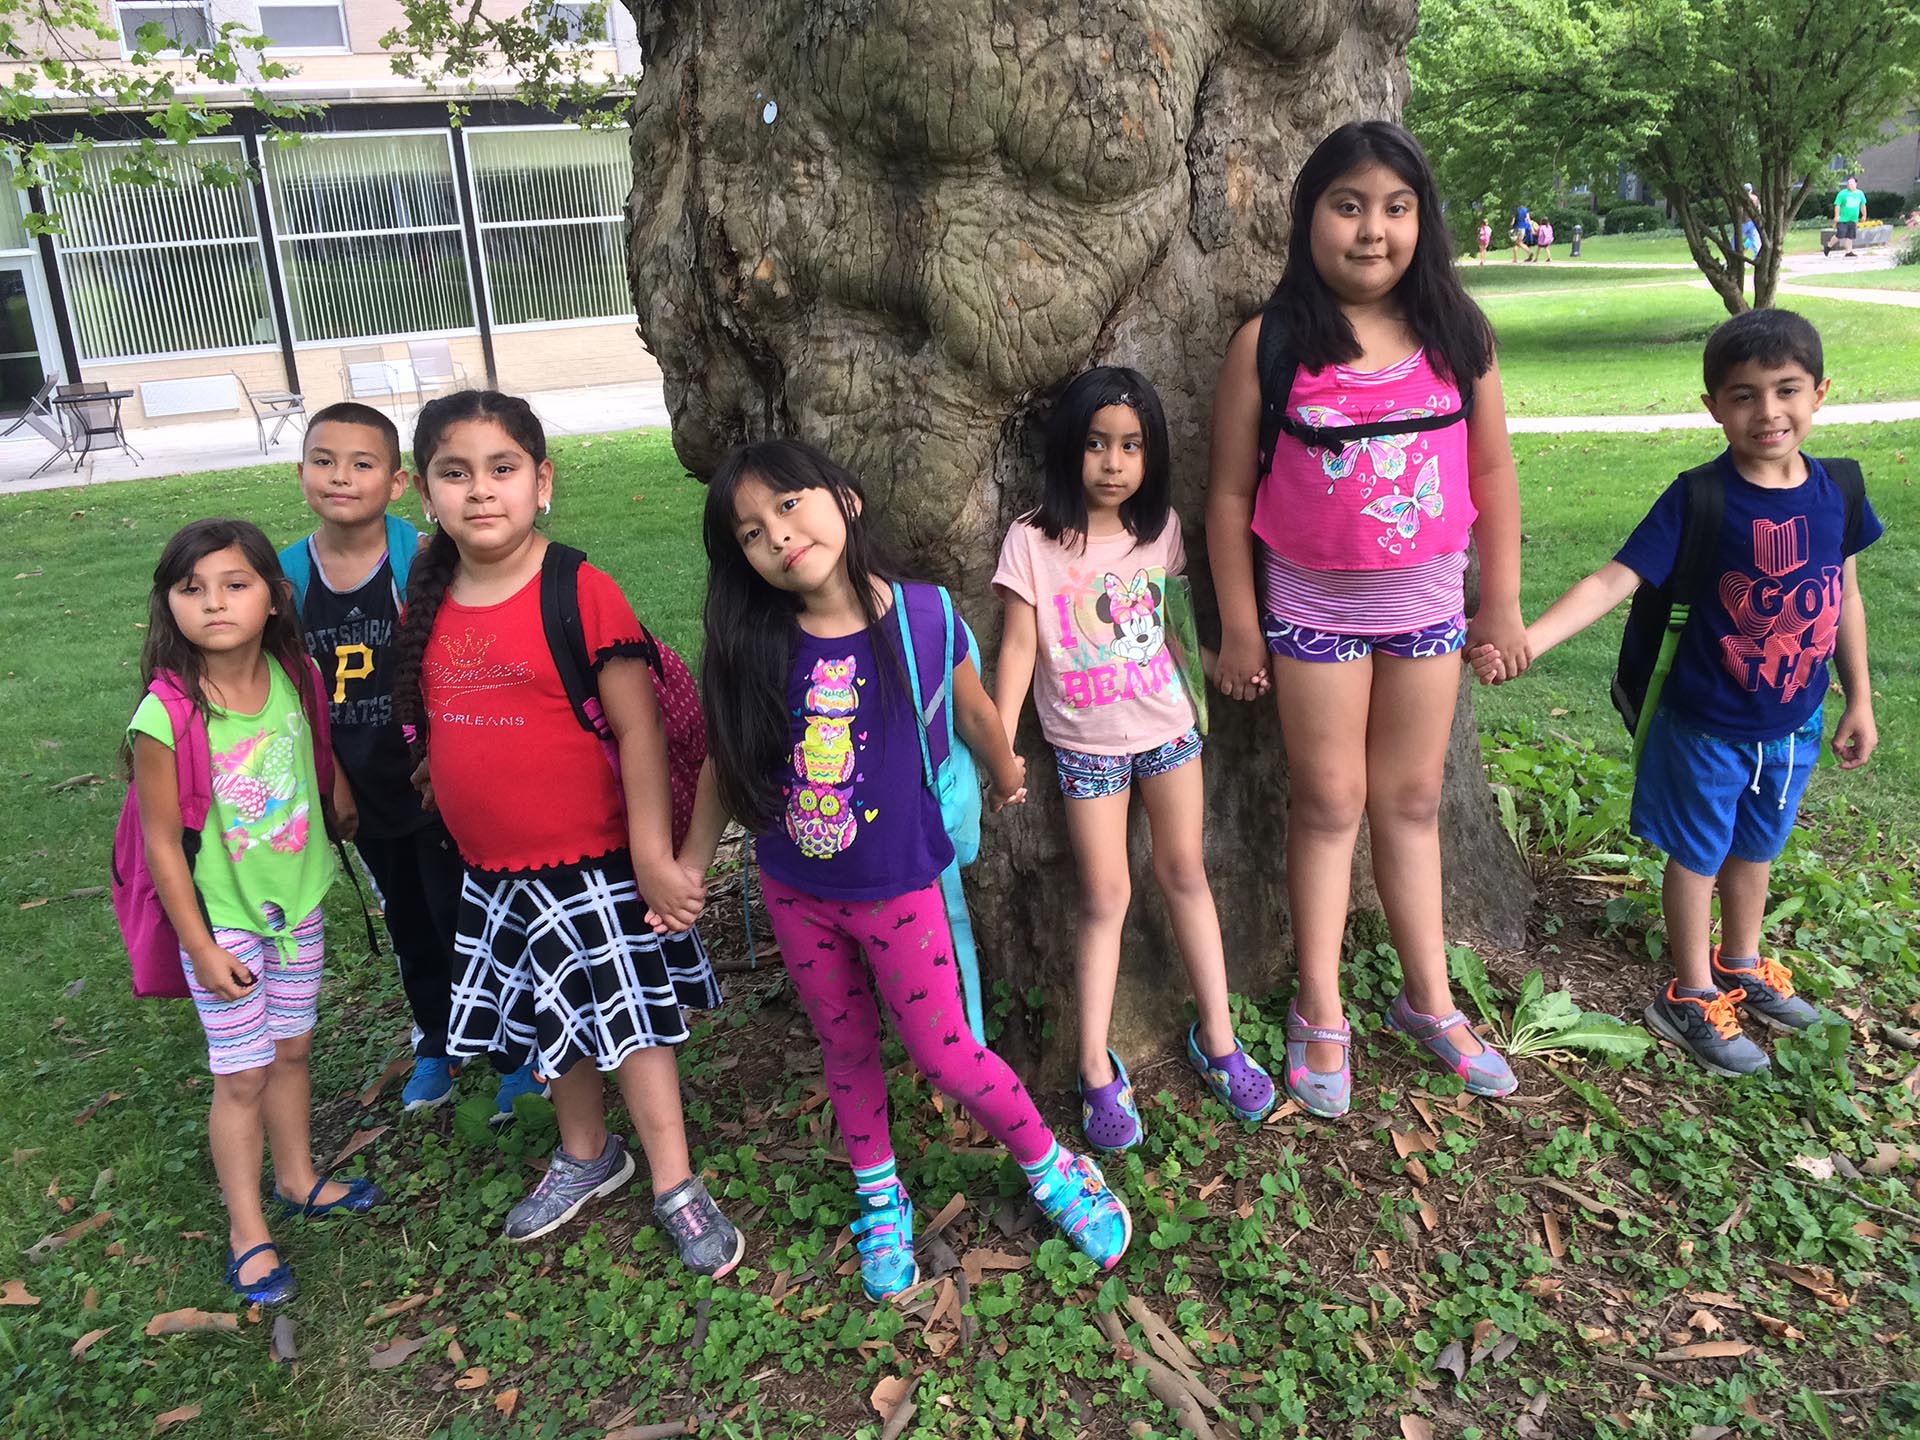 Immigrant Outreach Programs for Children is part of the Ursuline Sisters Mission. Children spend the day together socializing in a safe, healthy environment.